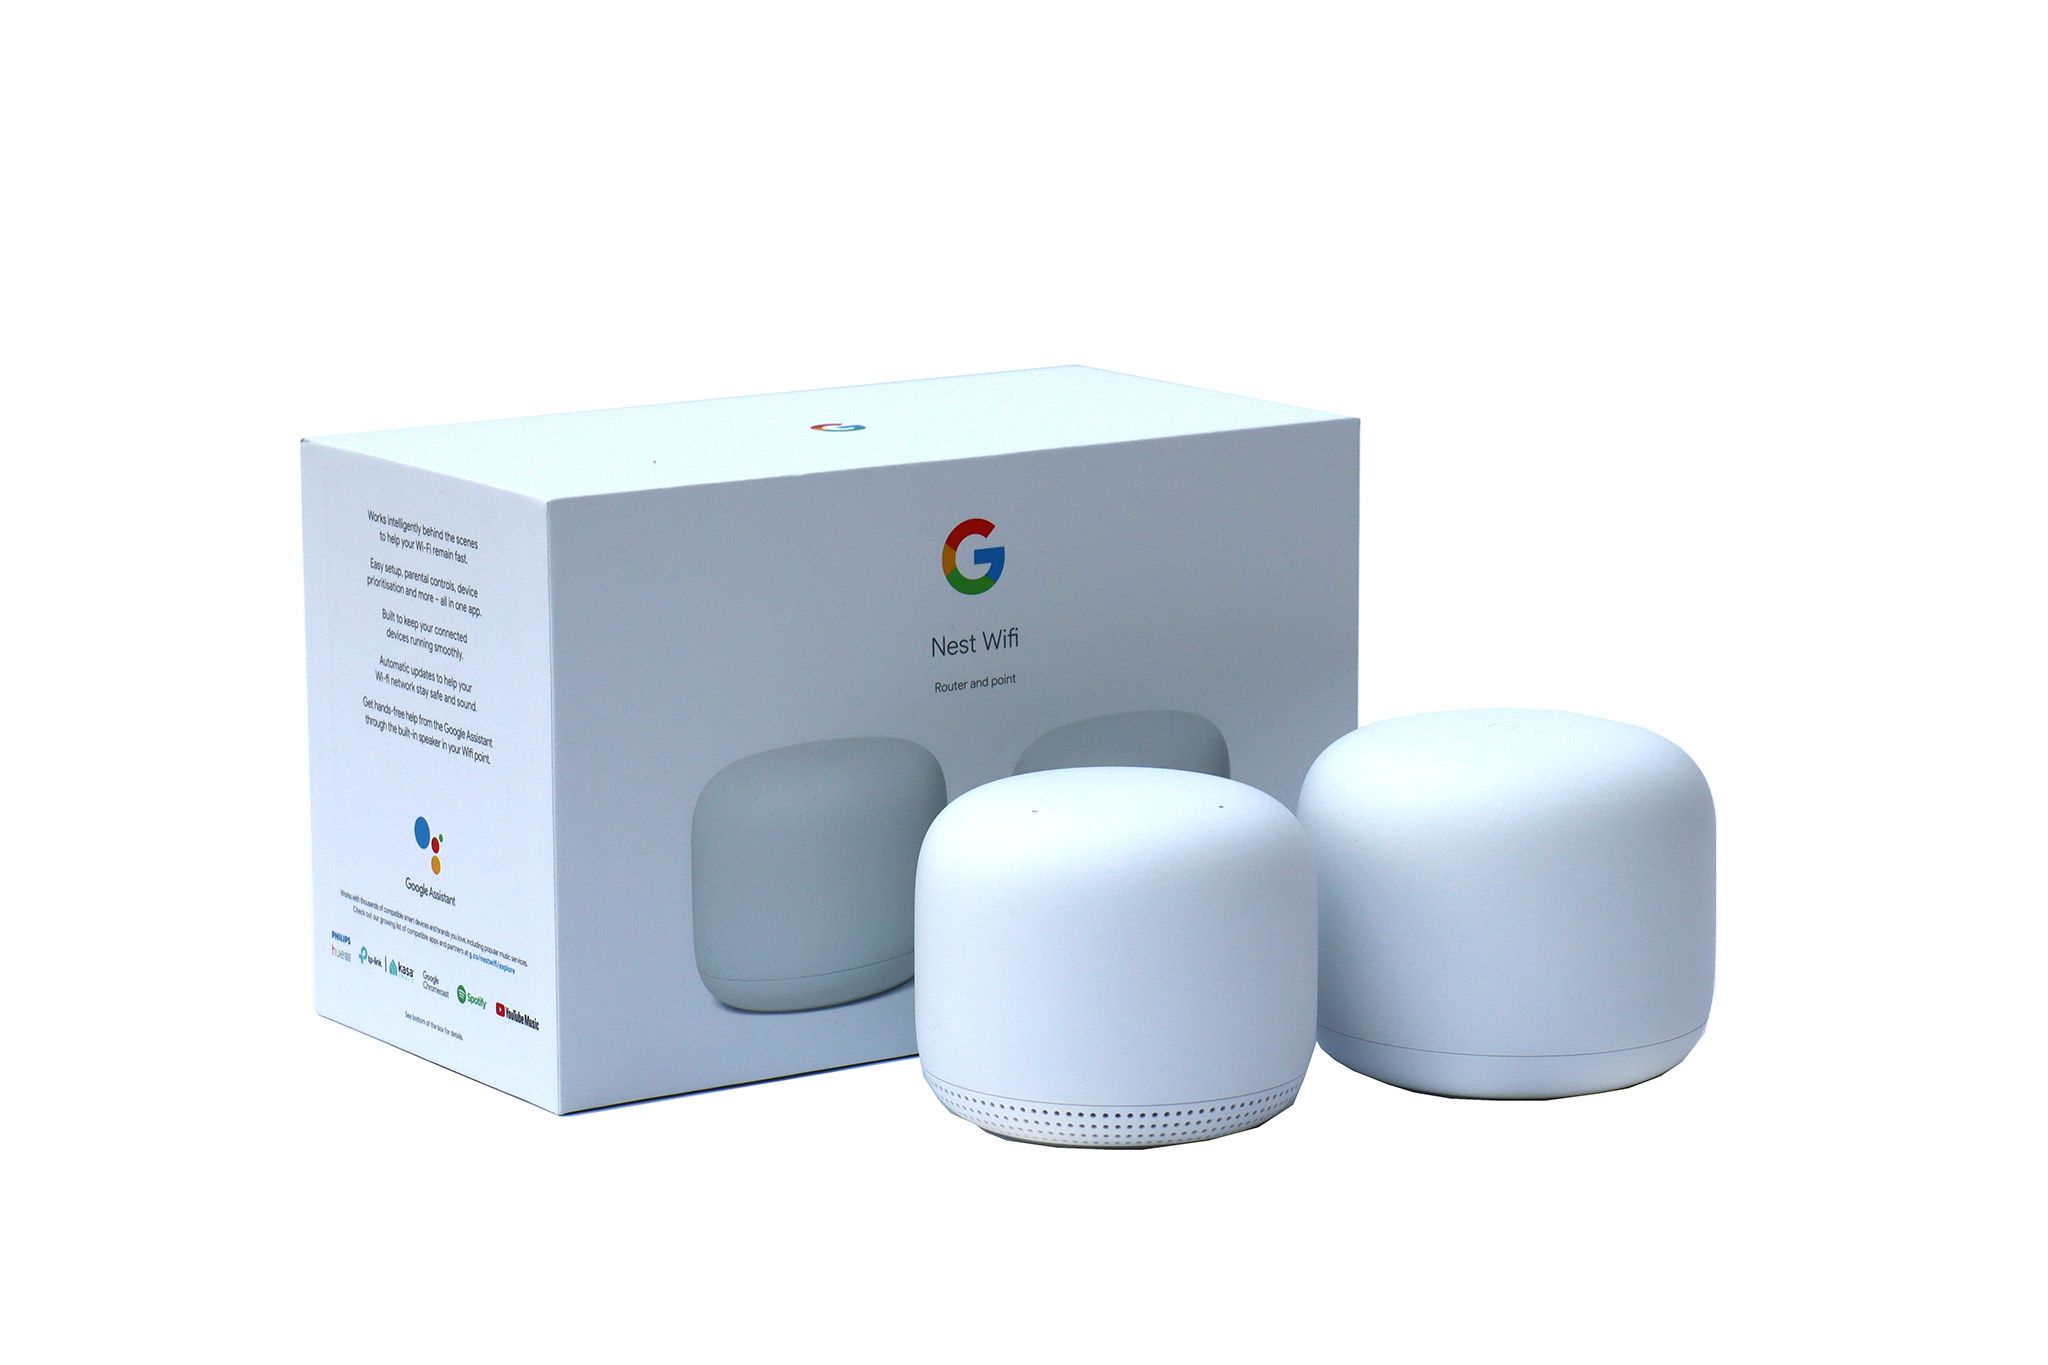 Google Nest Wifi review: Simple, speedy mesh internet and a great